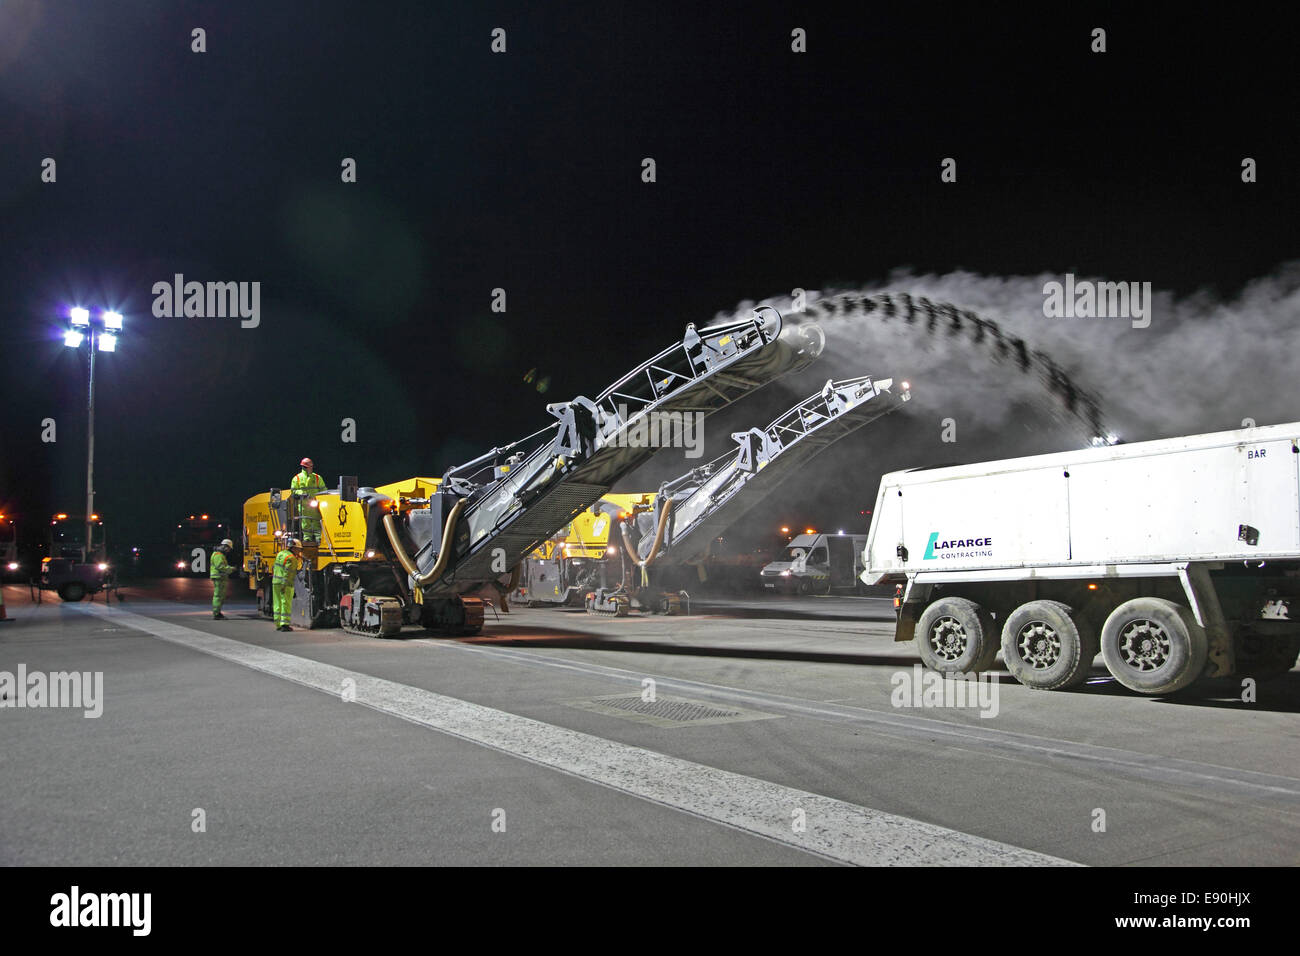 Heathrow airport, London. Maintenance teams resurface the south runway during an overnight closure.  Two road planes strip away the top surface. Stock Photo